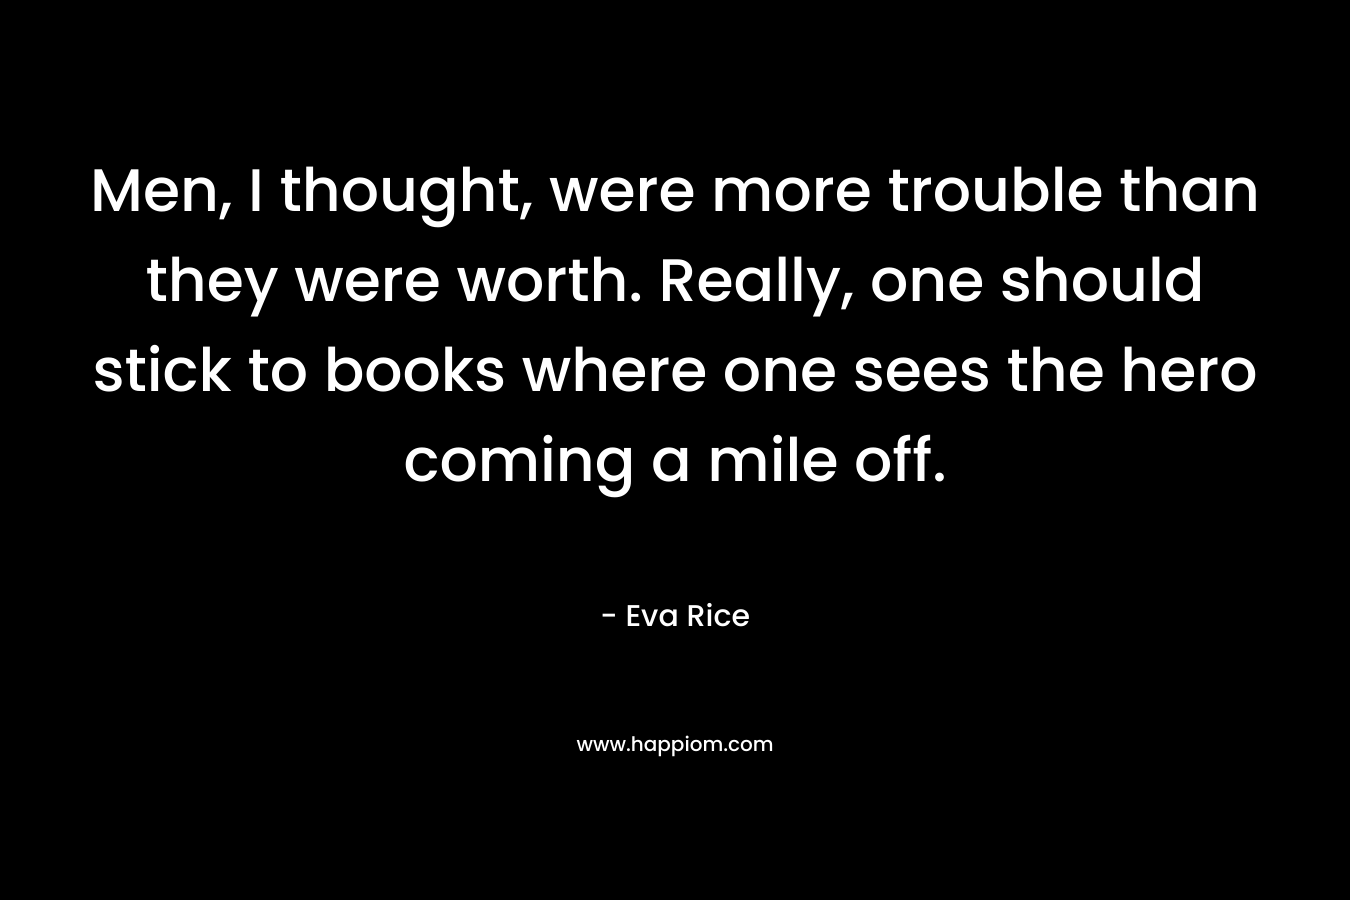 Men, I thought, were more trouble than they were worth. Really, one should stick to books where one sees the hero coming a mile off. – Eva Rice